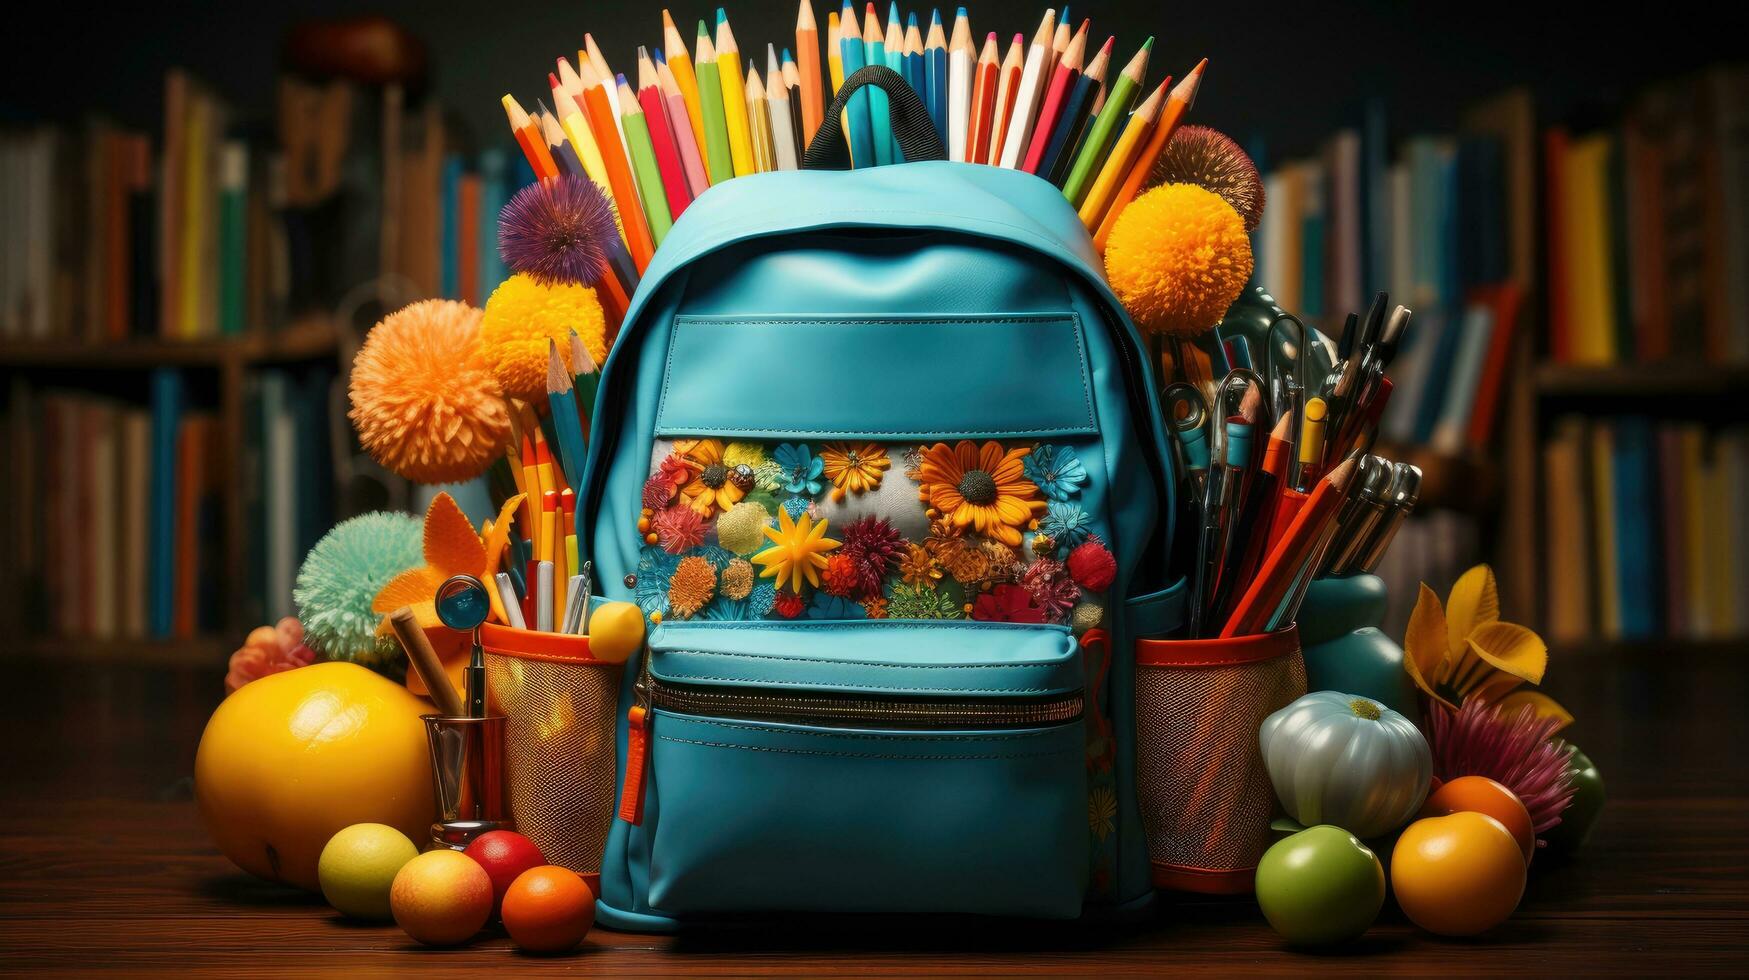 School backpack for textbooks pens pencils books and other educational supplies for learning, back to school concept photo